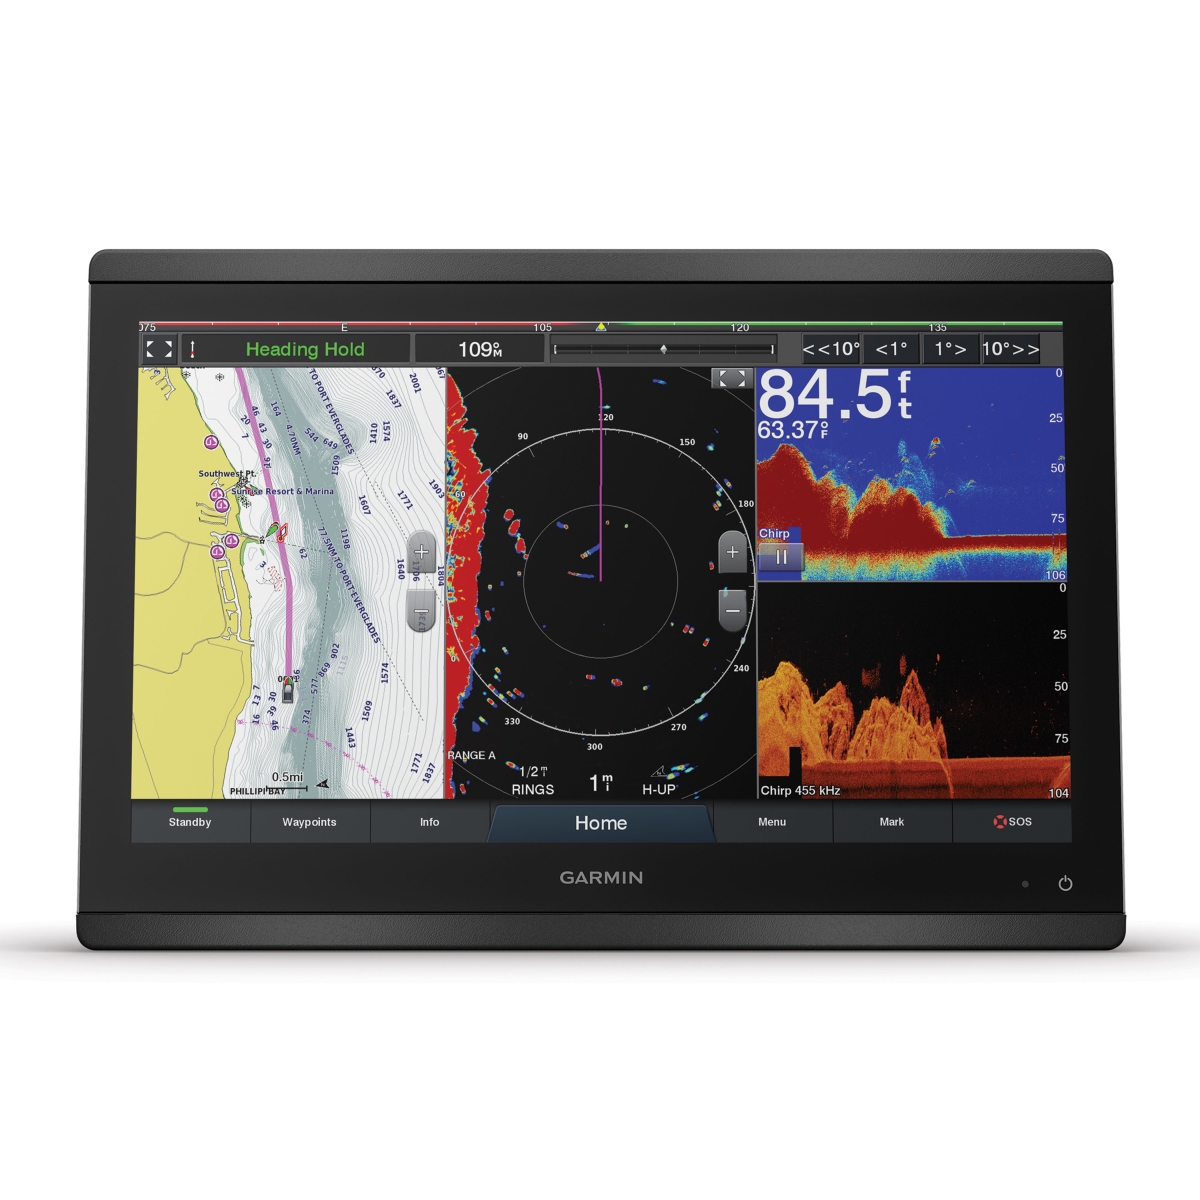 Picture of Garmin 3005.4689 16 in. GPSMAP 8616xsv Chartplotter & Sonar Combo with Full HD In-plane Switching Touchscreen